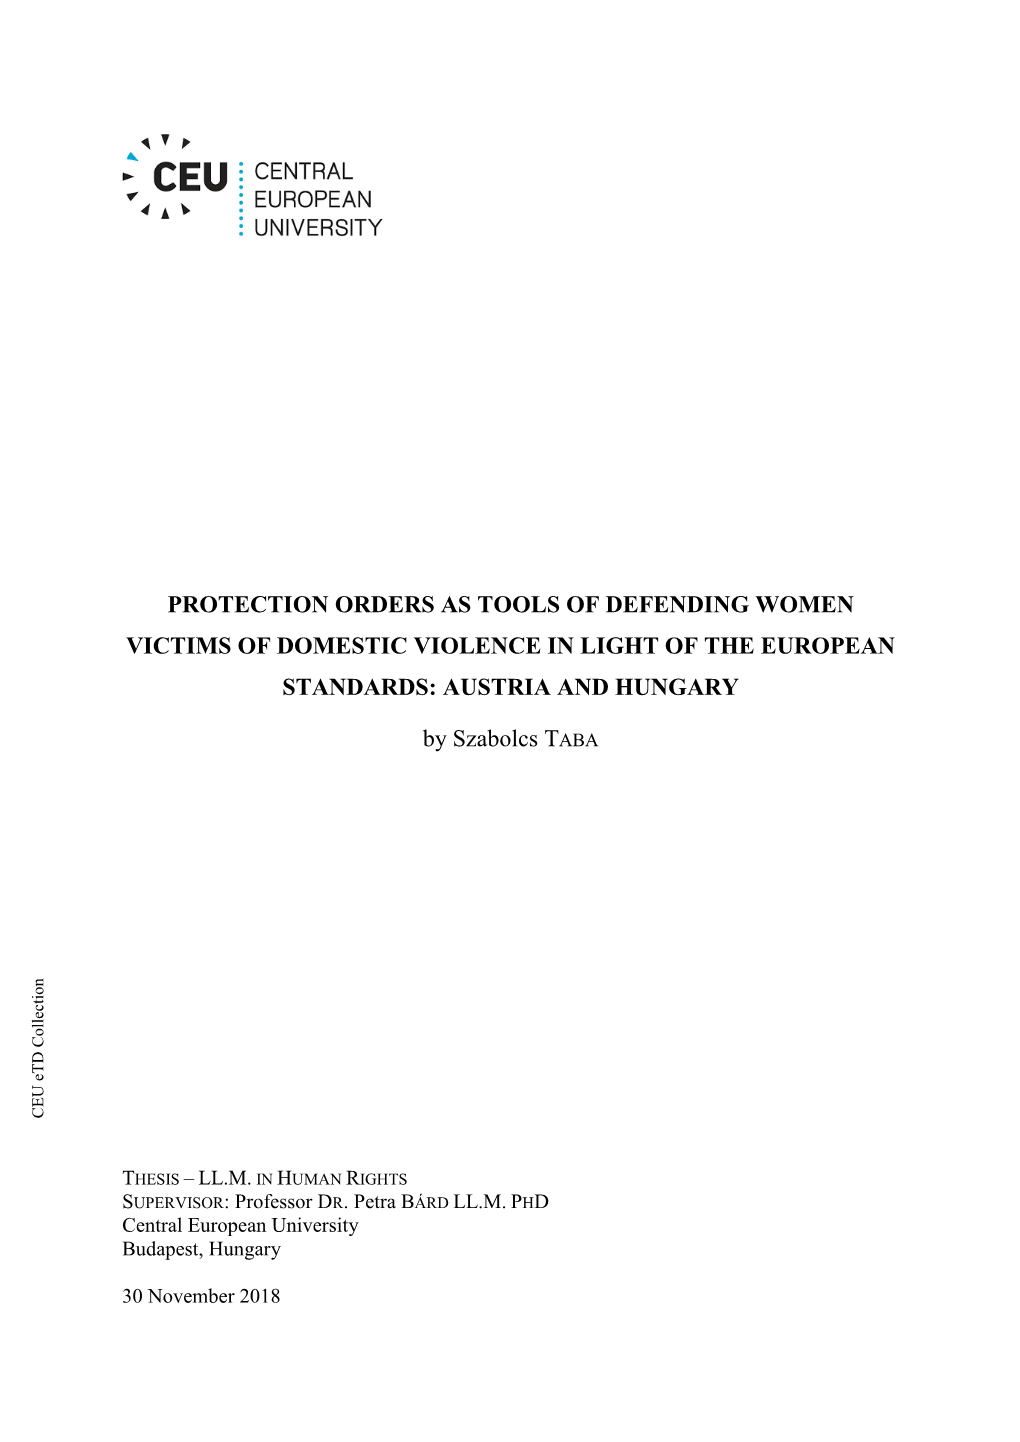 Protection Orders As Tools of Defending Women Victims of Domestic Violence in Light of the European Standards: Austria and Hungary